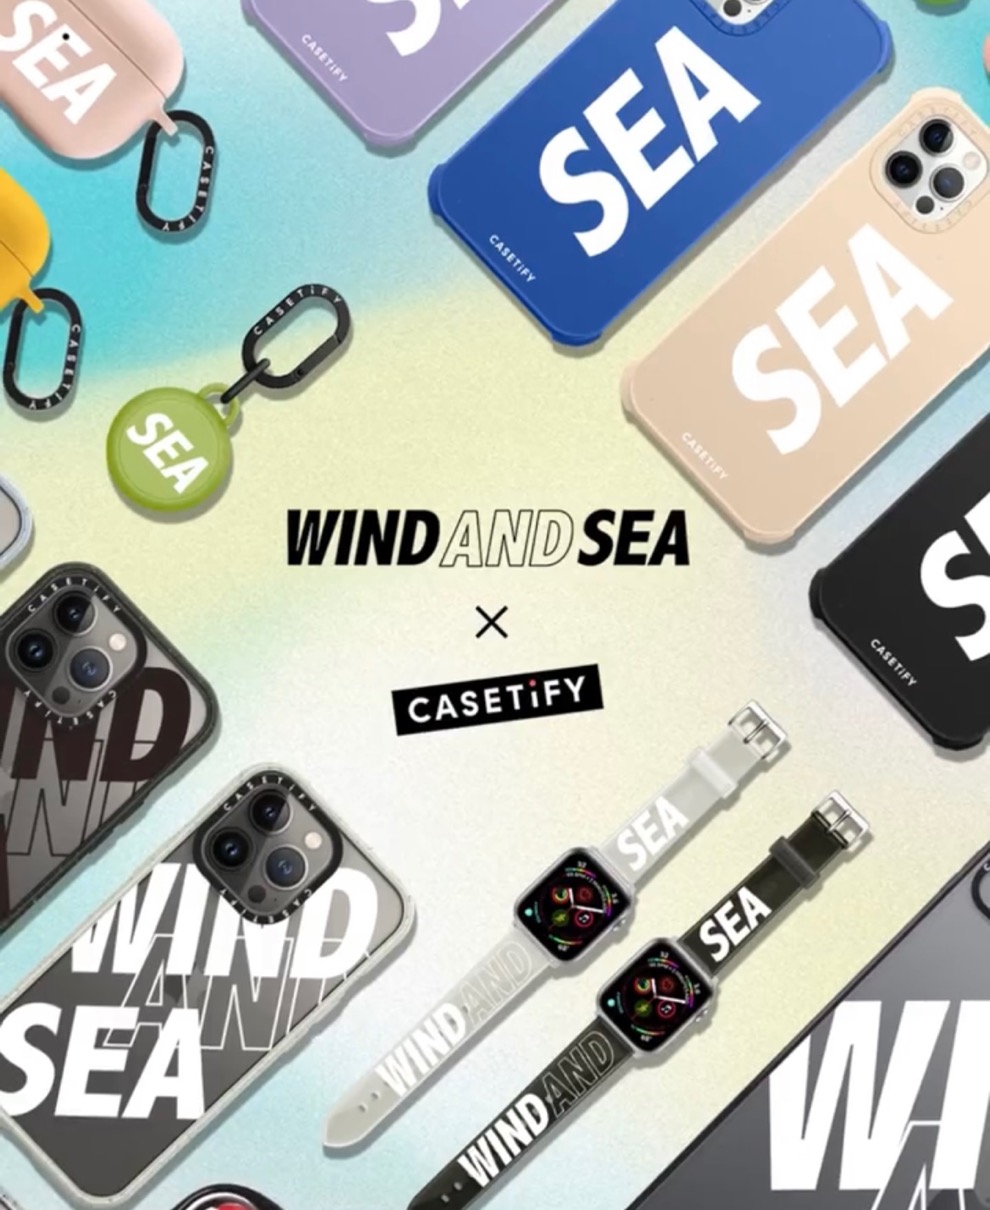 Casetify×WIND AND SEA iPHONE CASE